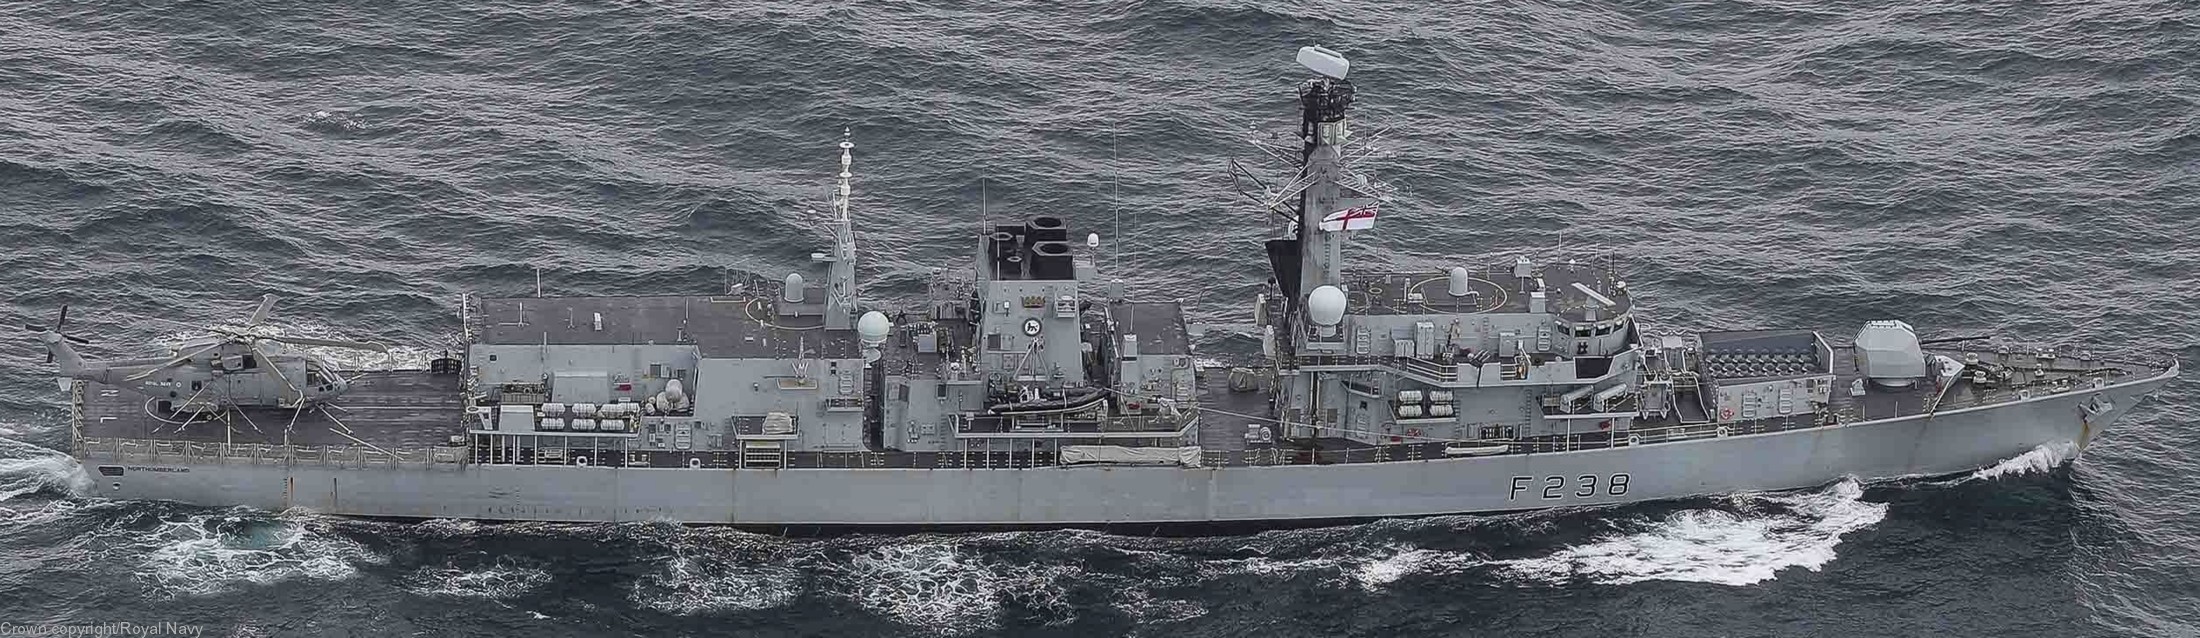 f-238 hms northumberland type 23 duke class guided missile frigate royal navy 26